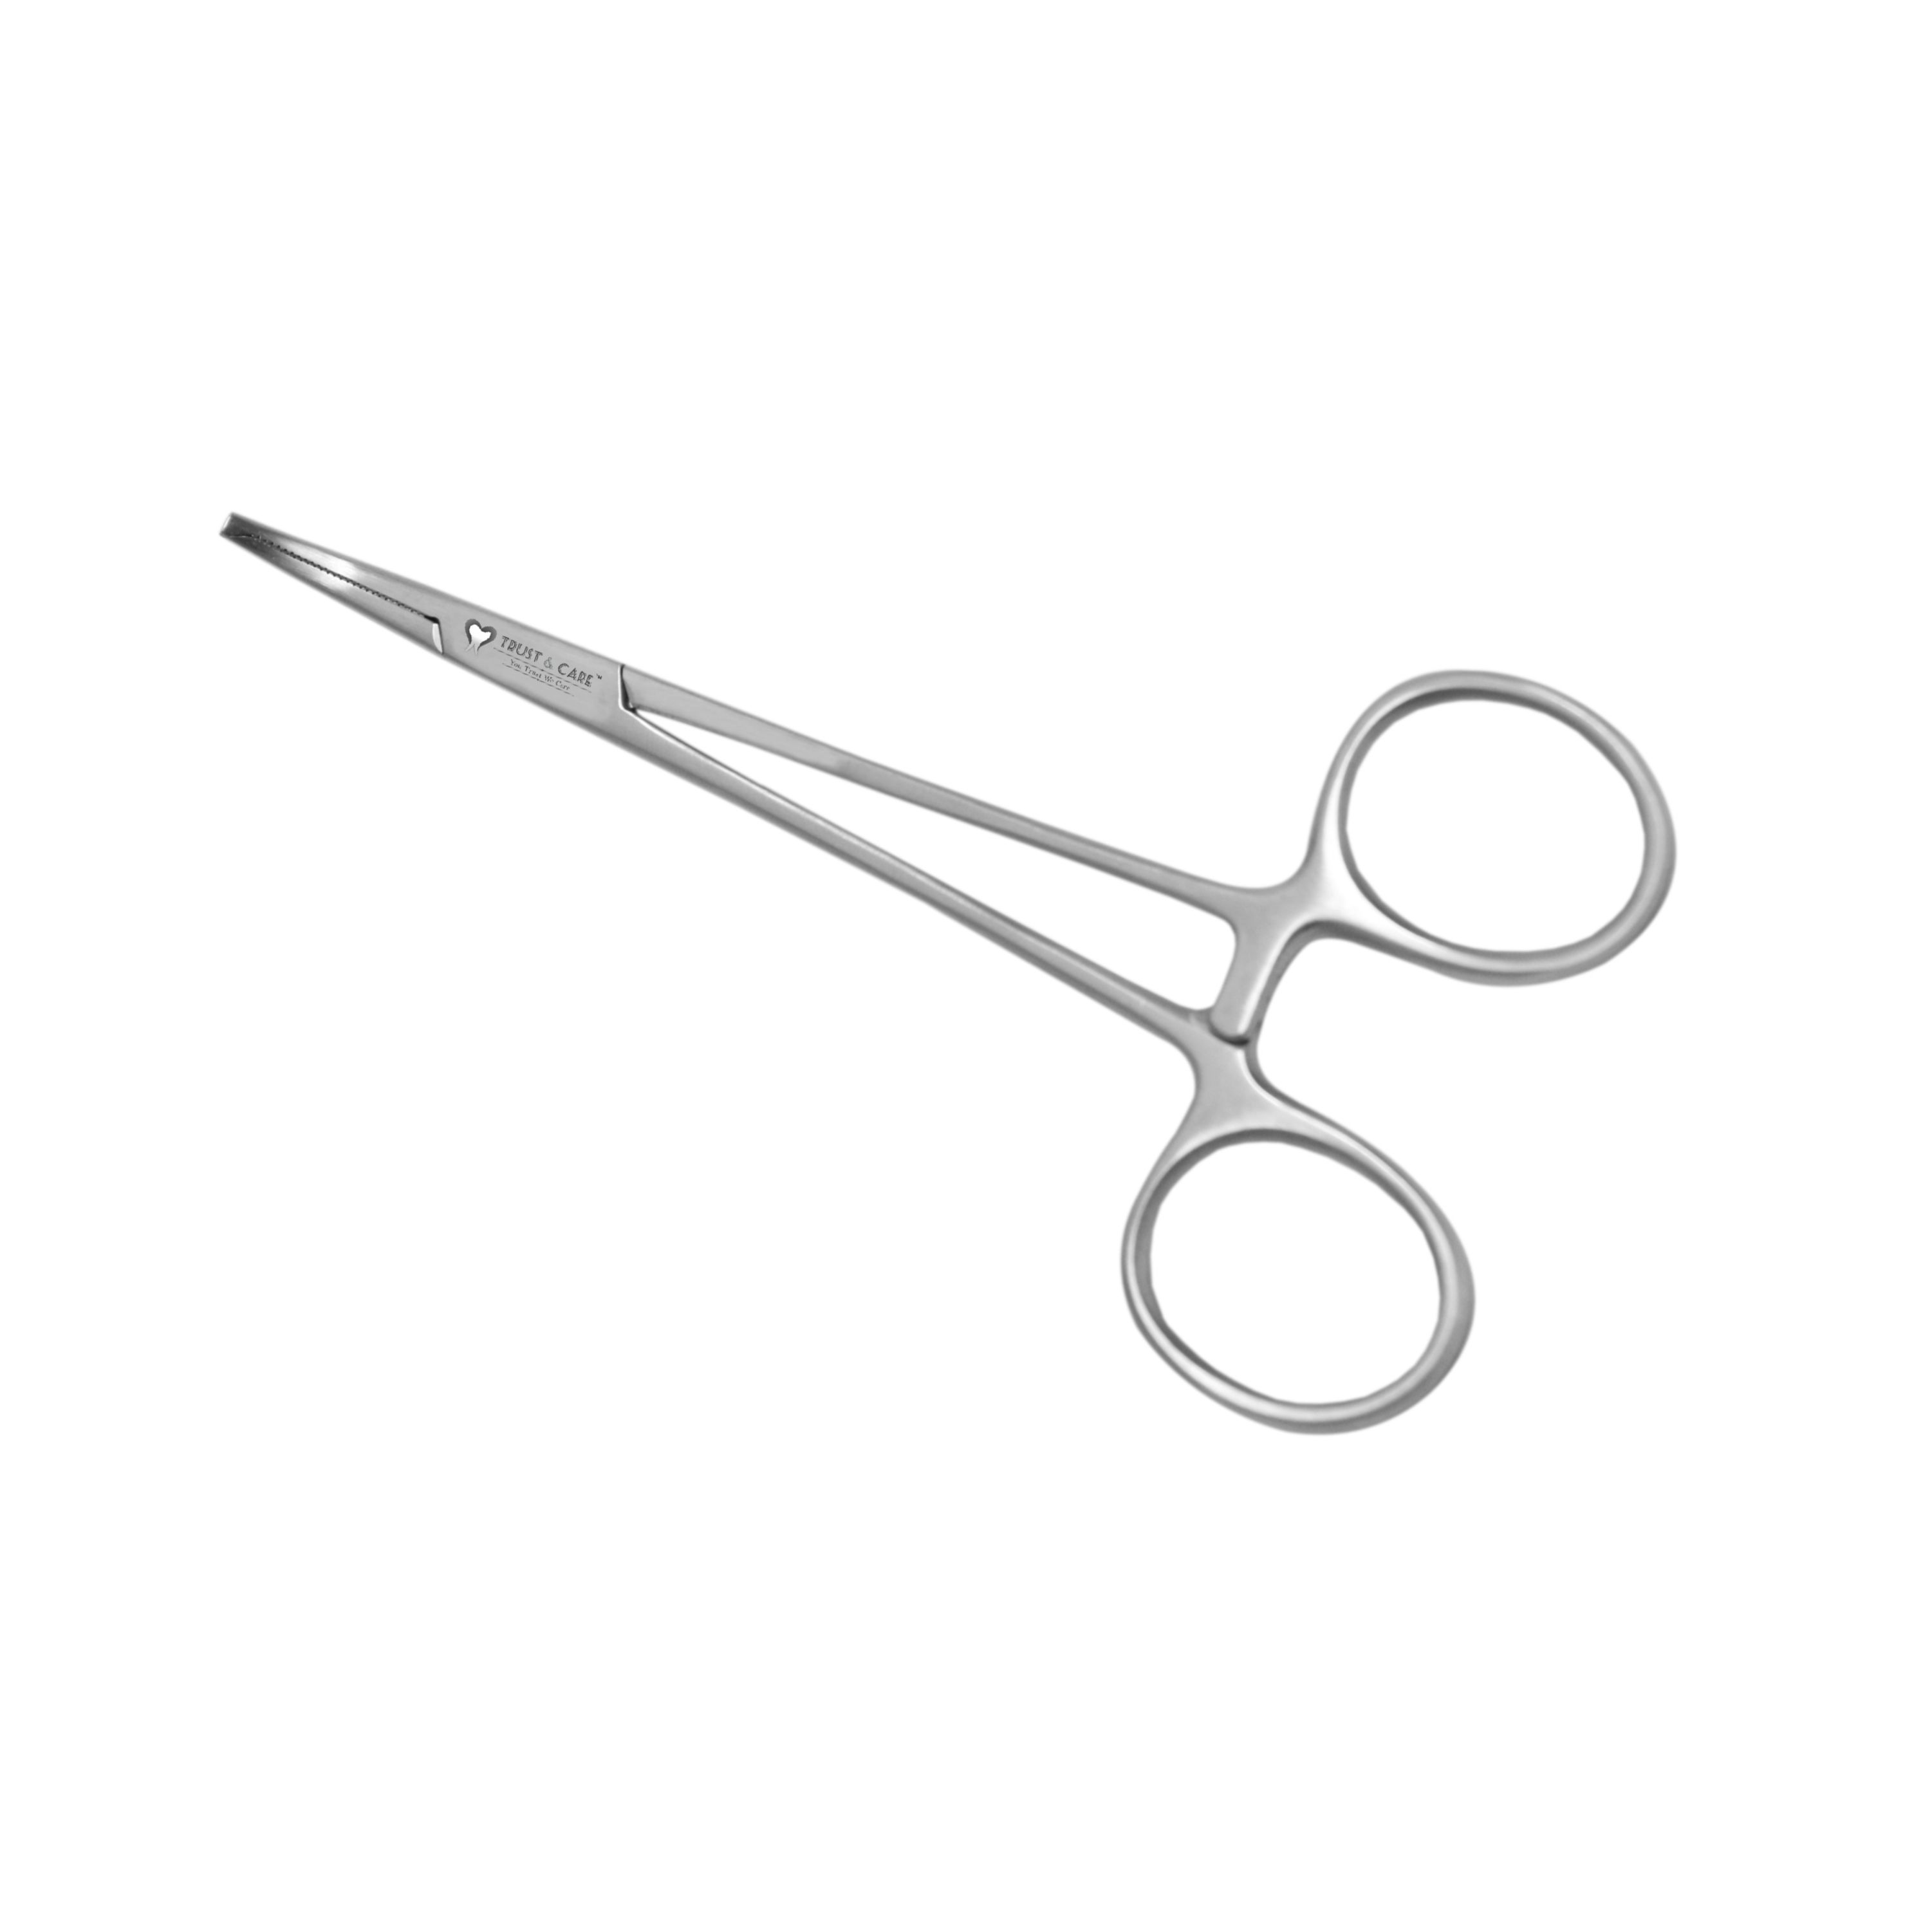 Trust & Care Mosquito With Tooth 1X2 Artery/Hemostats Forceps 12 Cm Curved